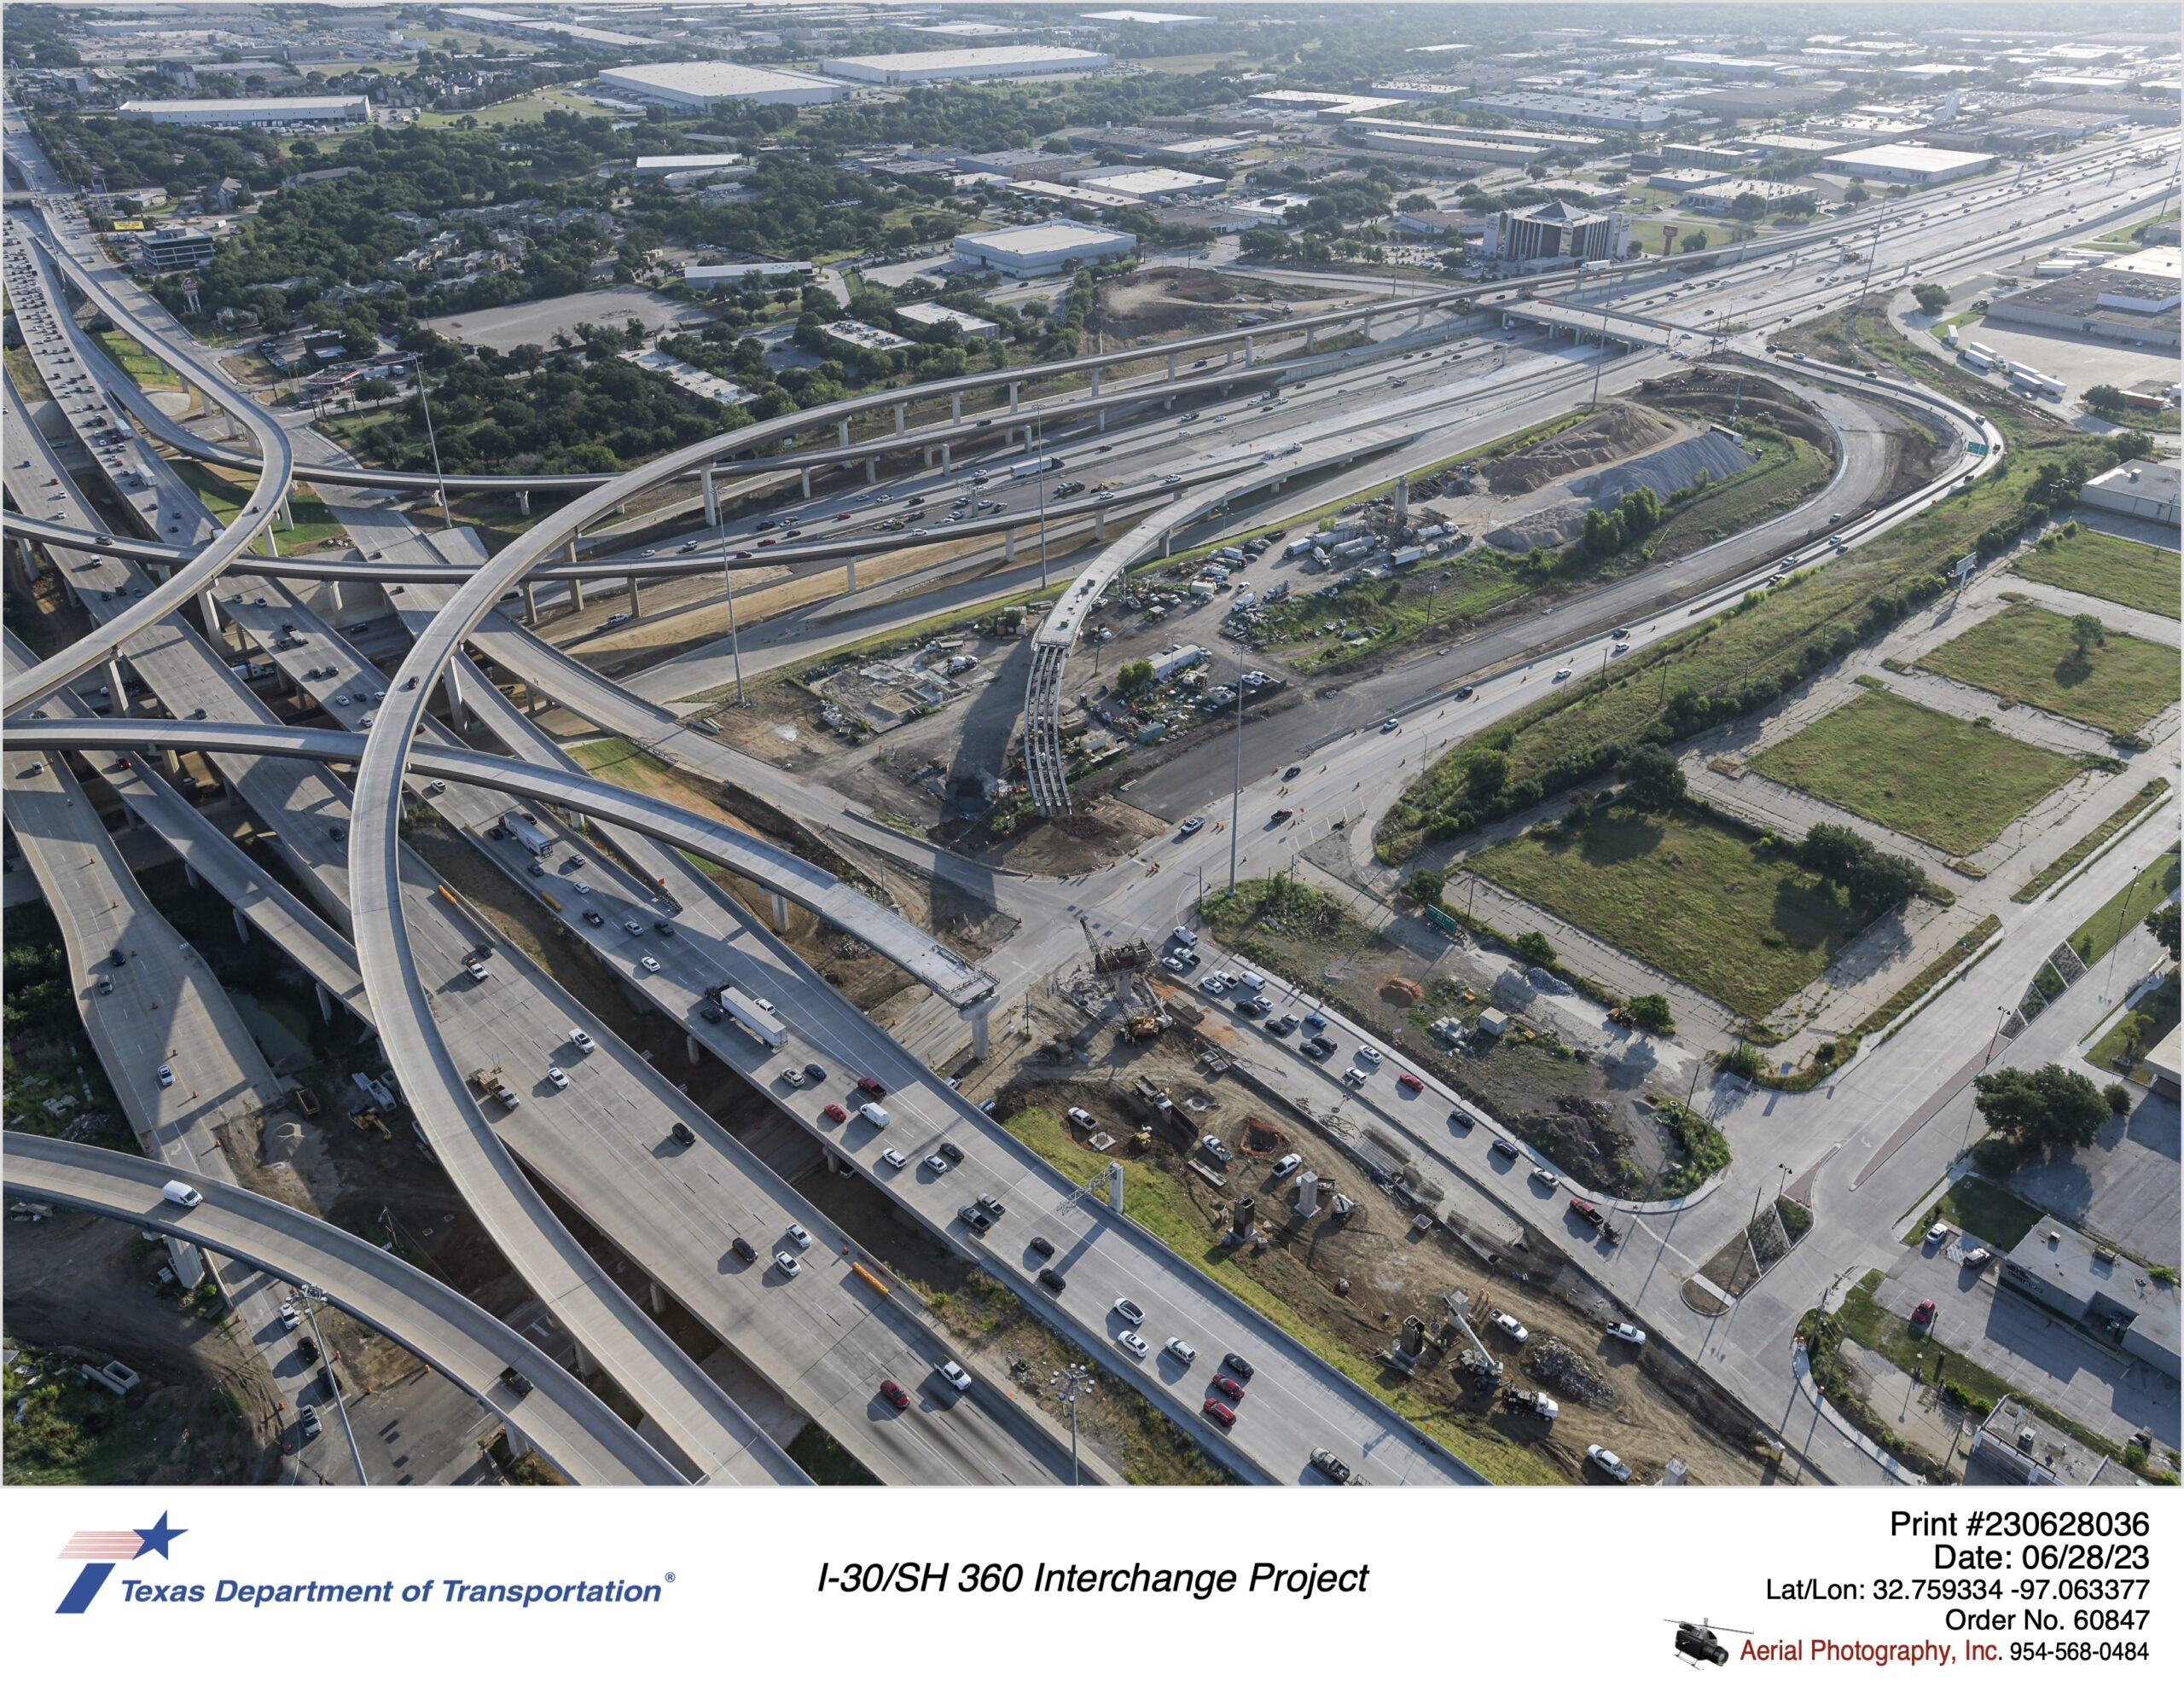 I-30 and SH 360 interchange looking northeast over Six Flags Dr interchange. Construction of new northbound direct connectors shown in image.